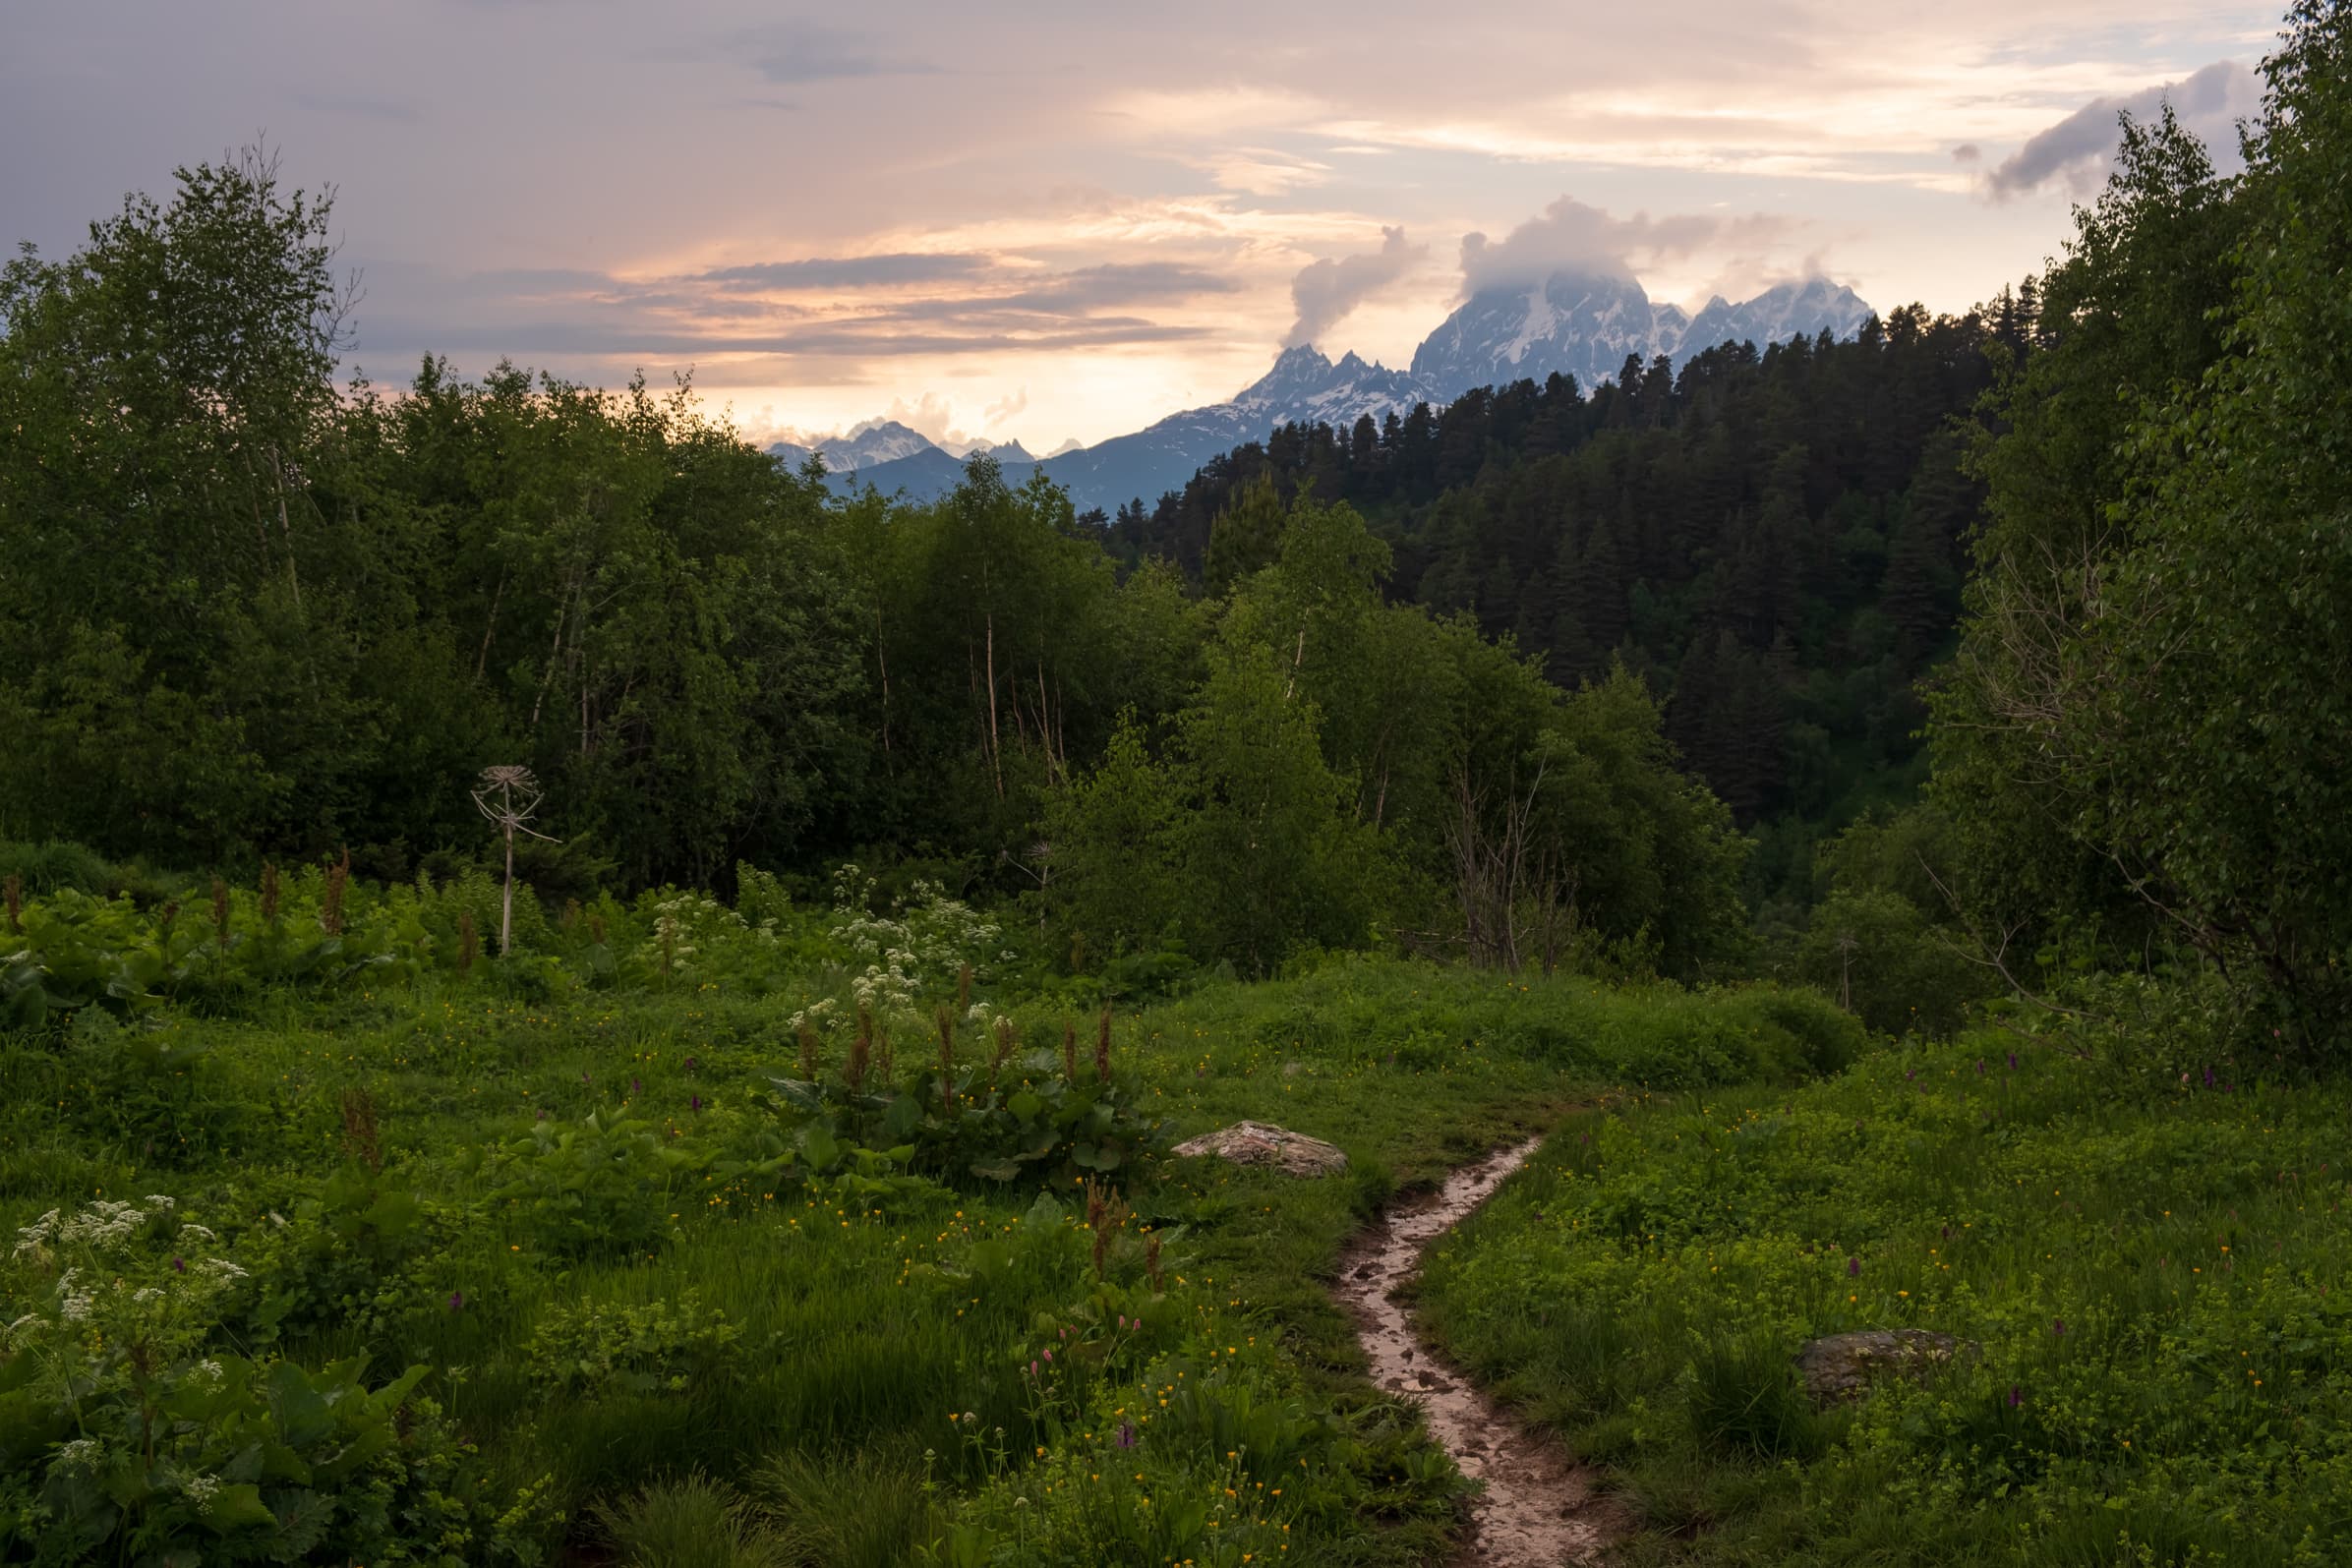 Sunset over mount Ushba from a wet forest trail, Svaneti